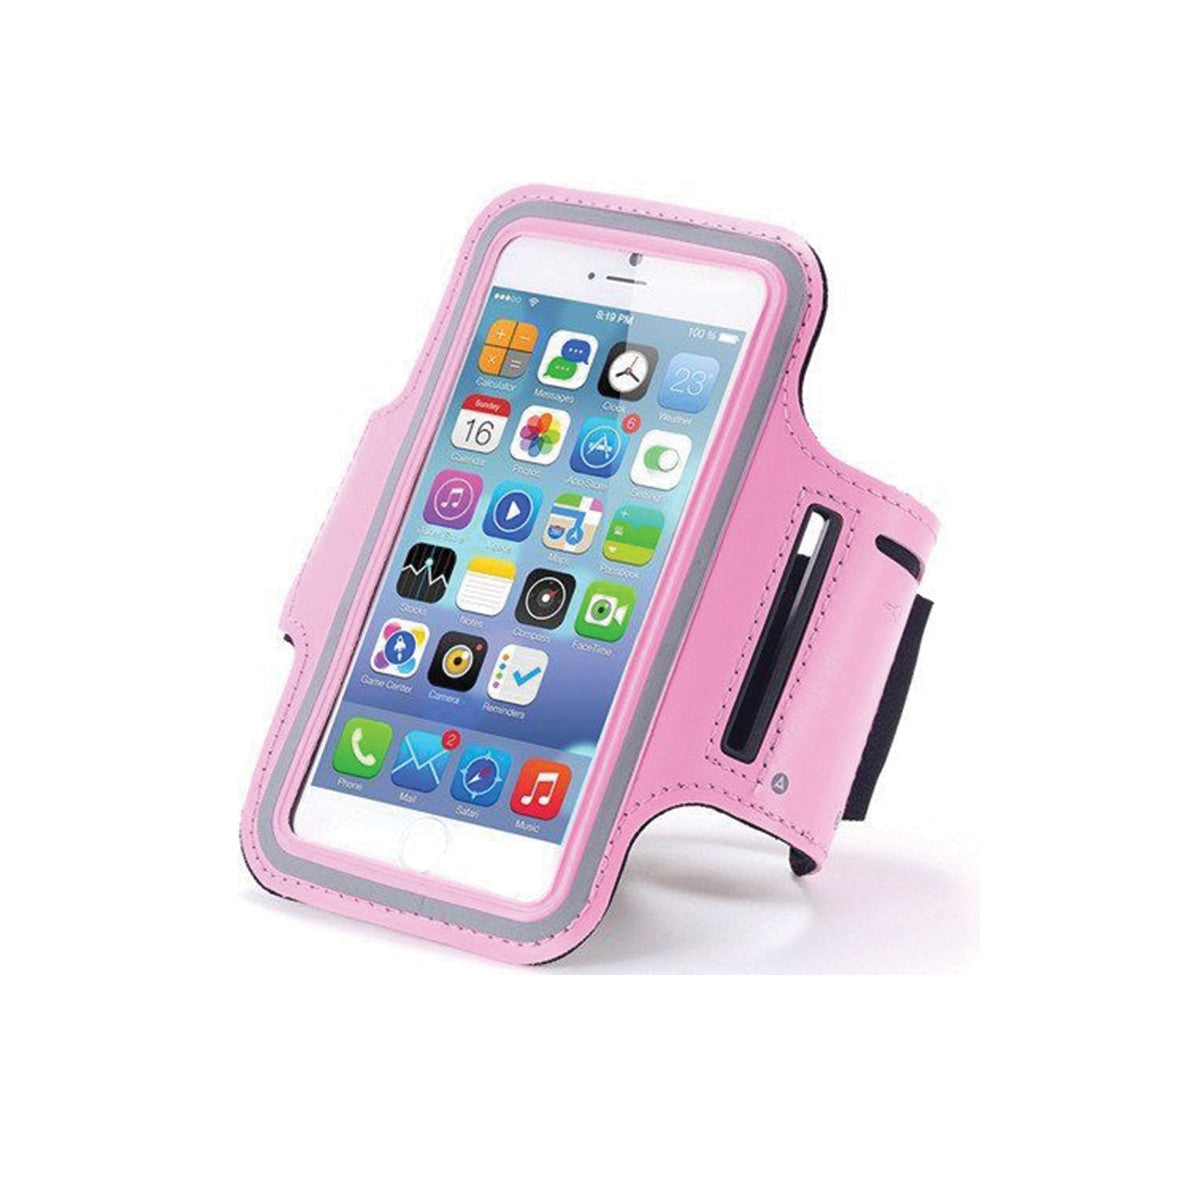 Gym Running Armband For Apple iPhone 5 6 7 & Plus   